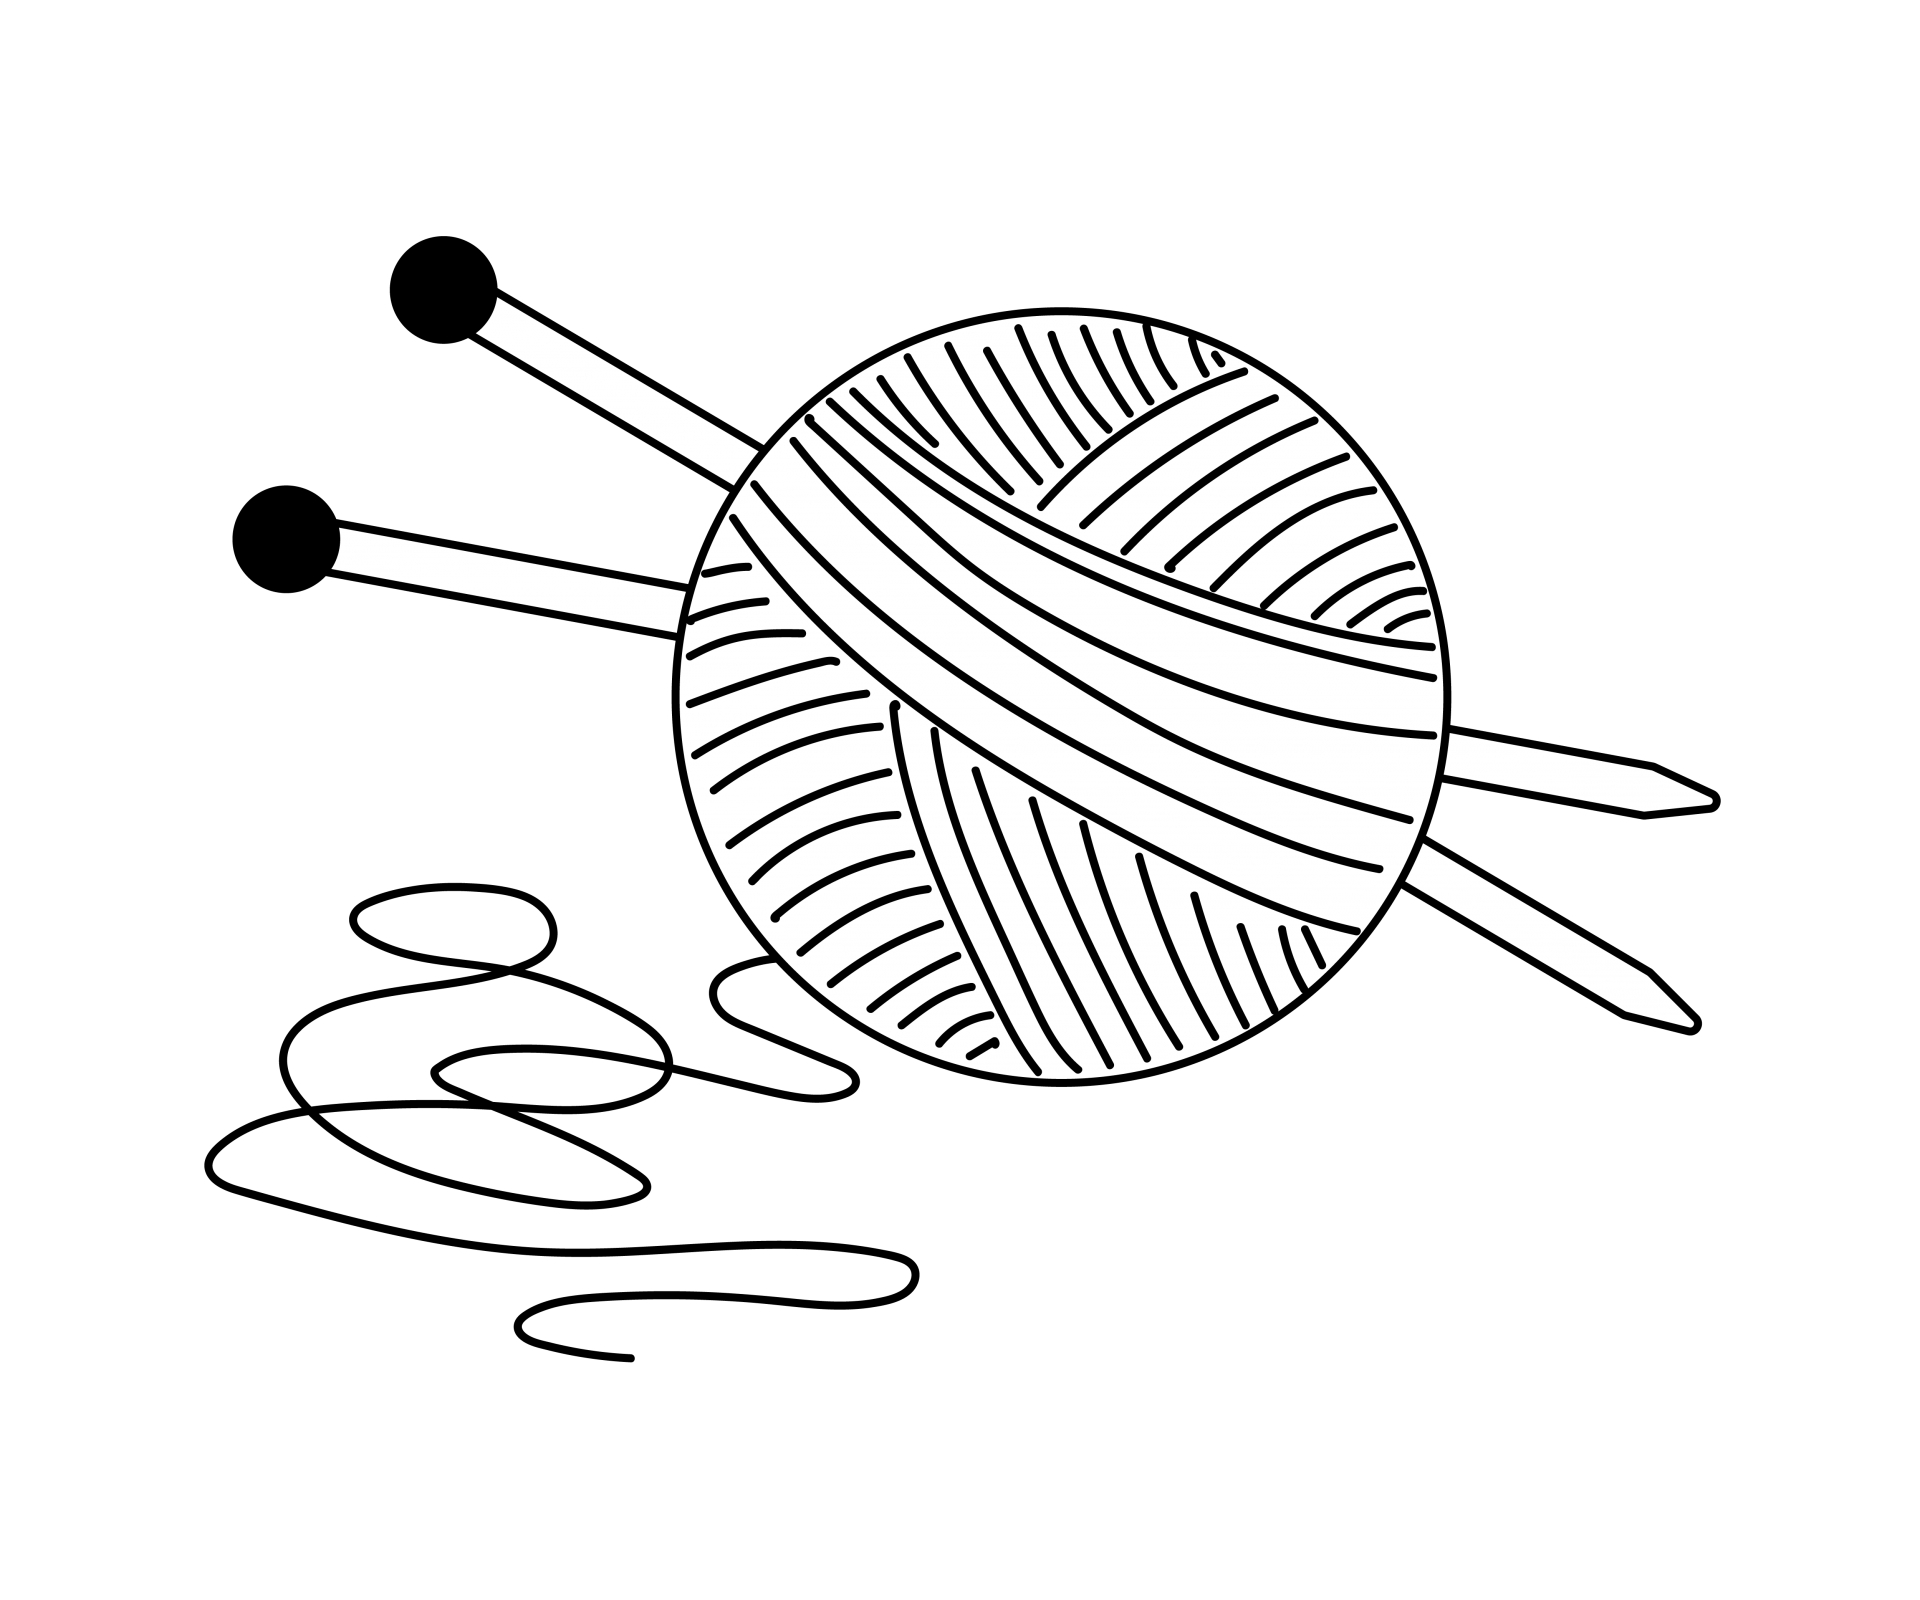 Ball of wool, knitting yarn and pair of knitting needles line art clipart